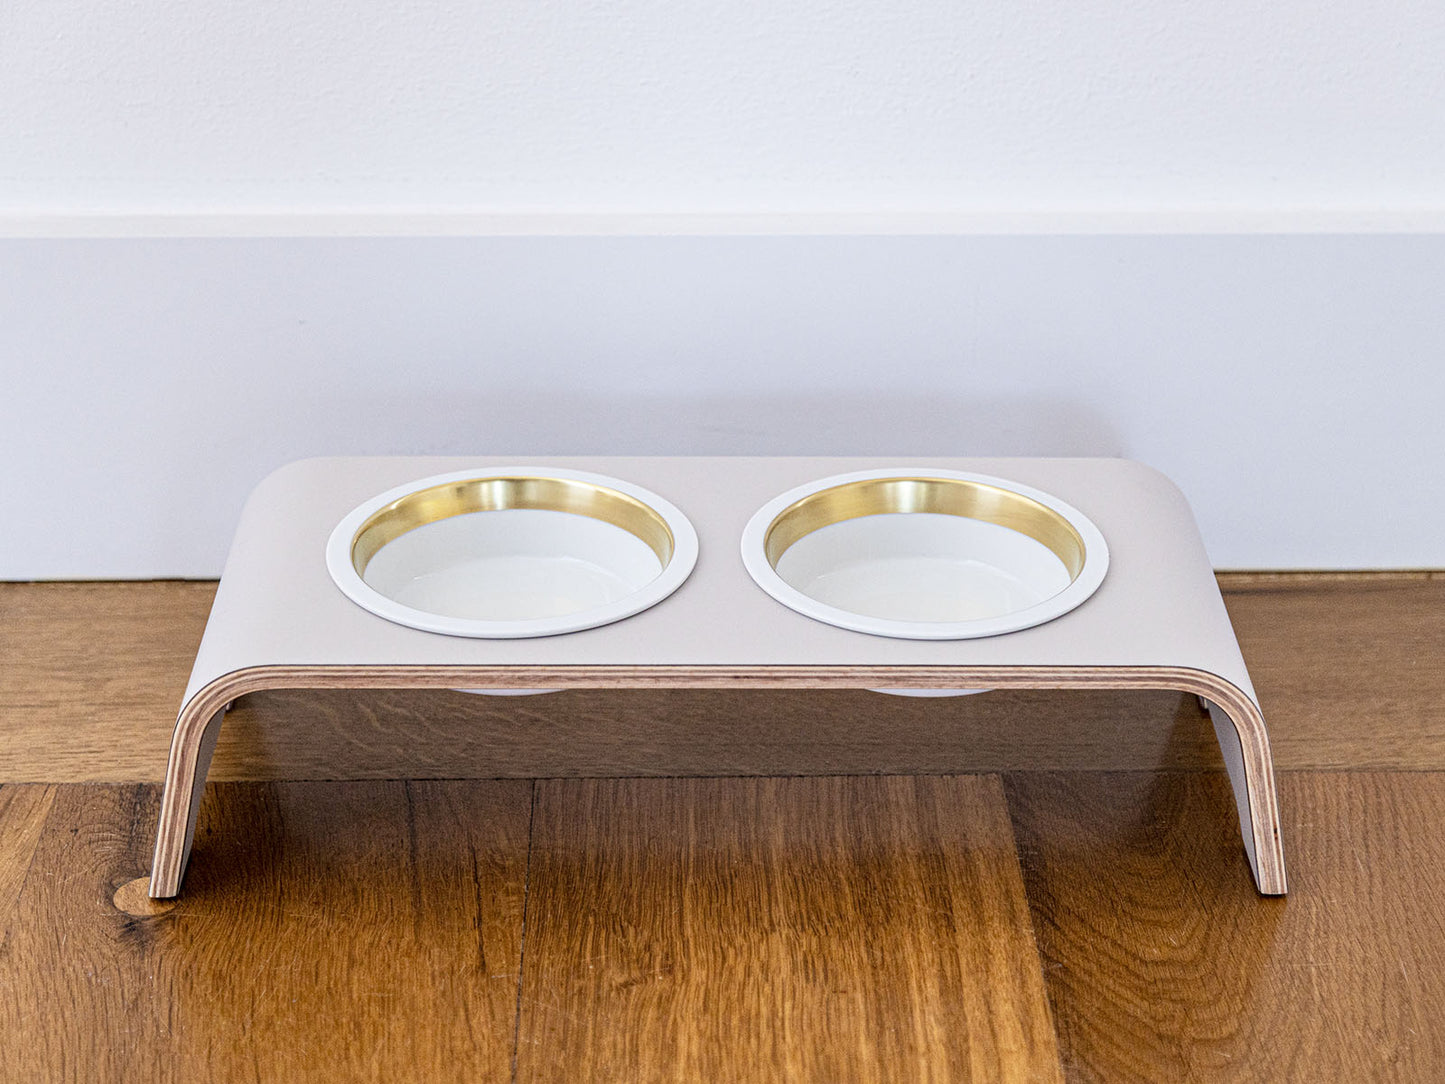 Surcharge GOLD Edition for two porcelain bowls of the dogBar® S or S-large